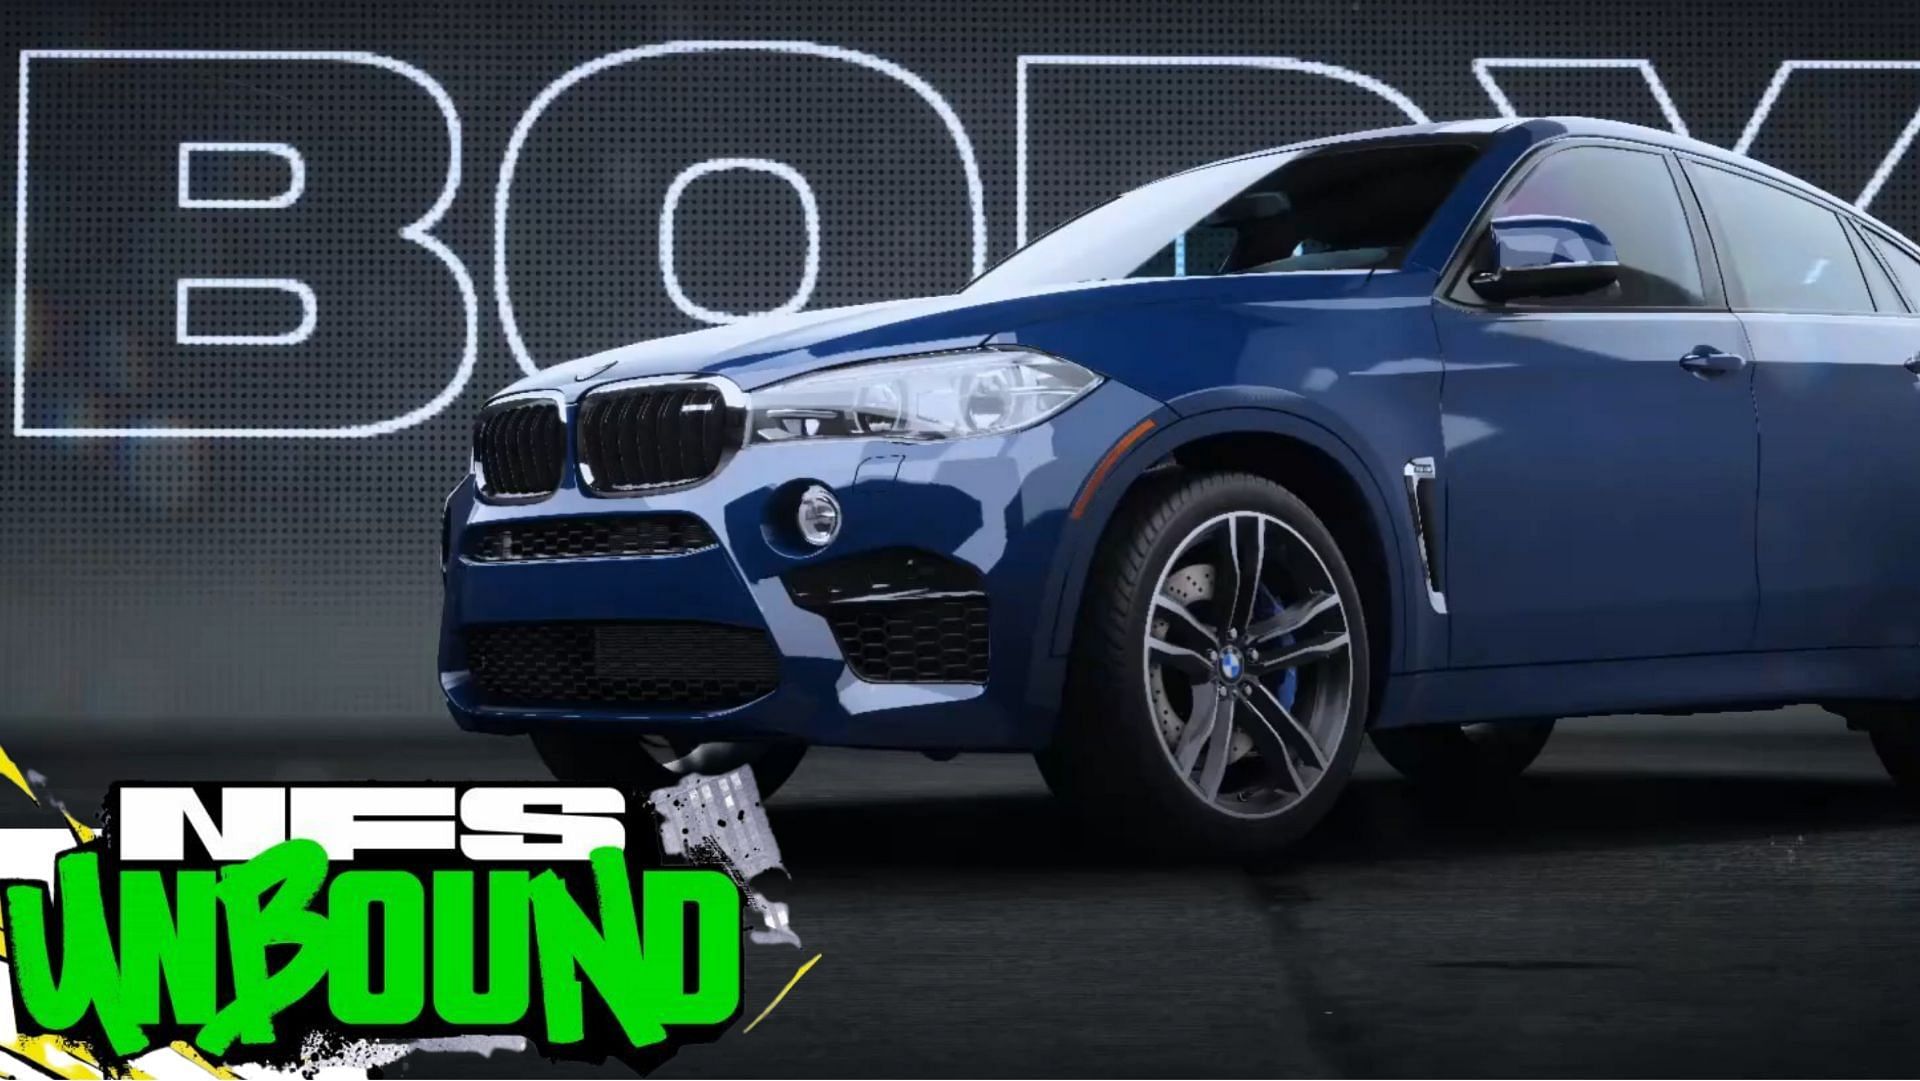 Obtaining the BMW X6 M 2016 in Need for Speed Unbound (Image via Criterion Games)